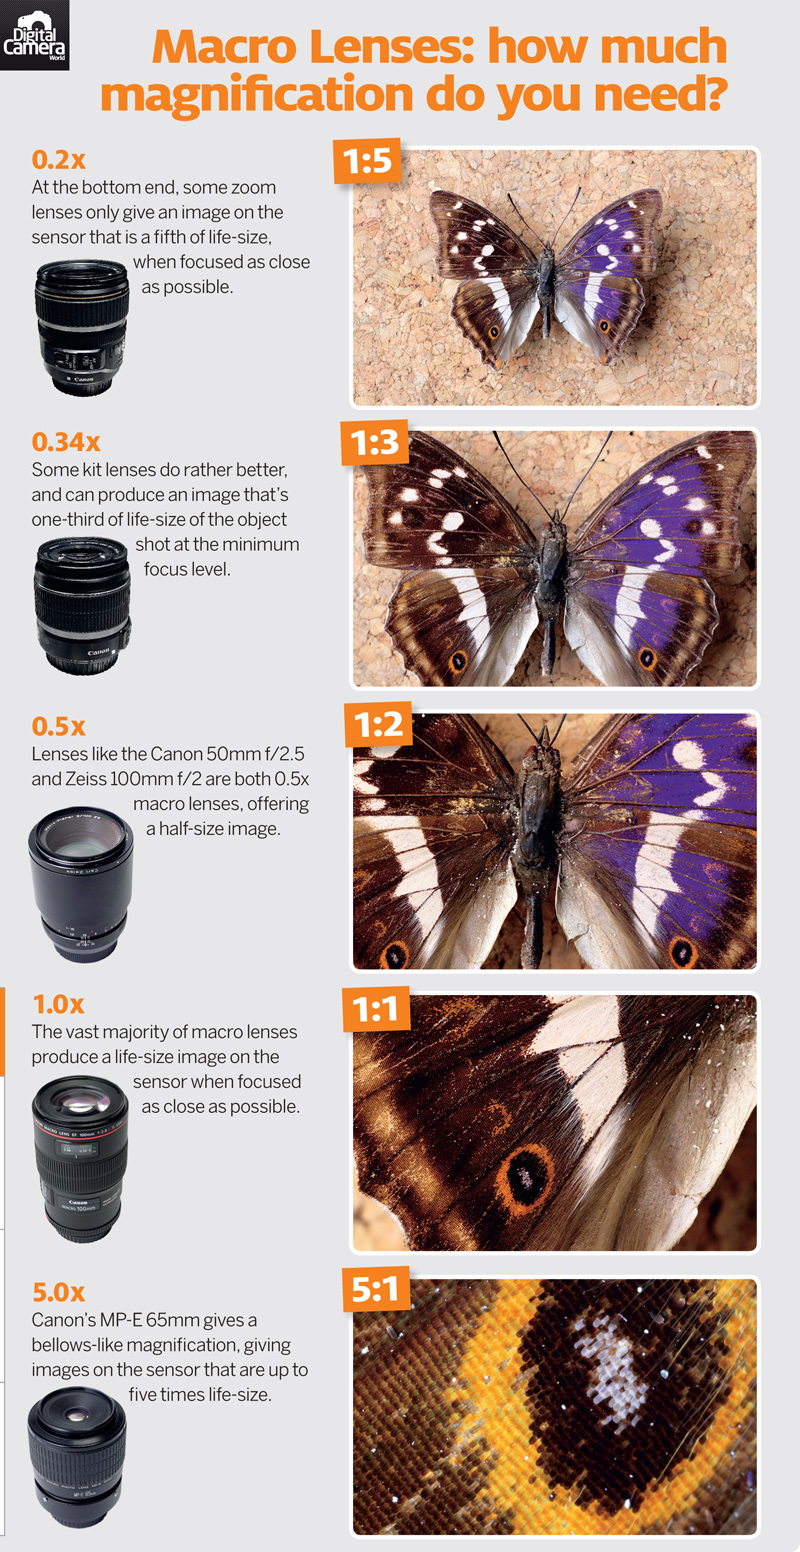 Cheat Sheet: Macro Lenses - How Much Magnification Do You Need